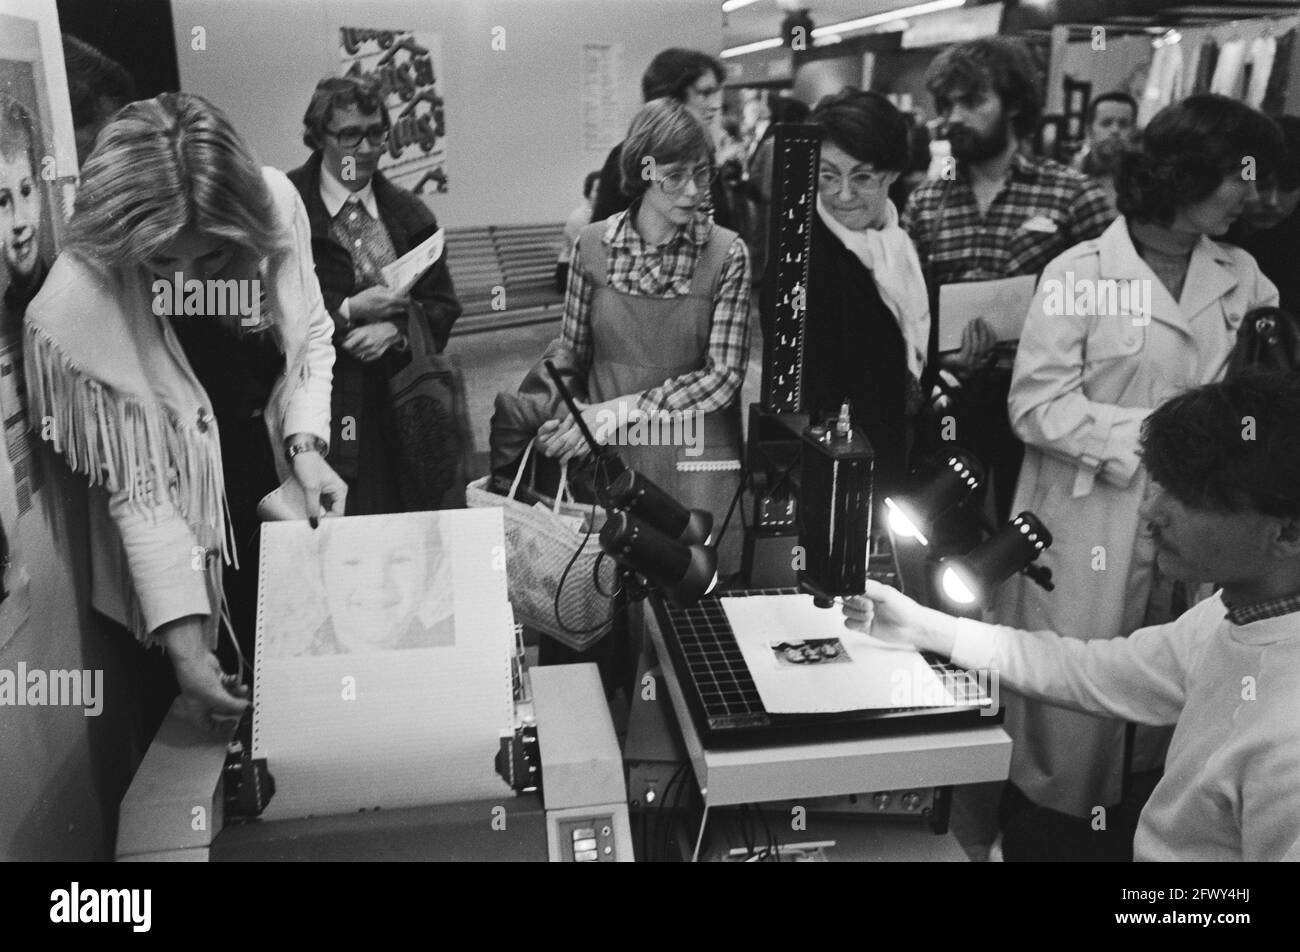 Audience at a demonstration of a computer that converts a photograph into an embroidery pattern at the Creative Trade Show, February 9, 1981, equipmen Stock Photo